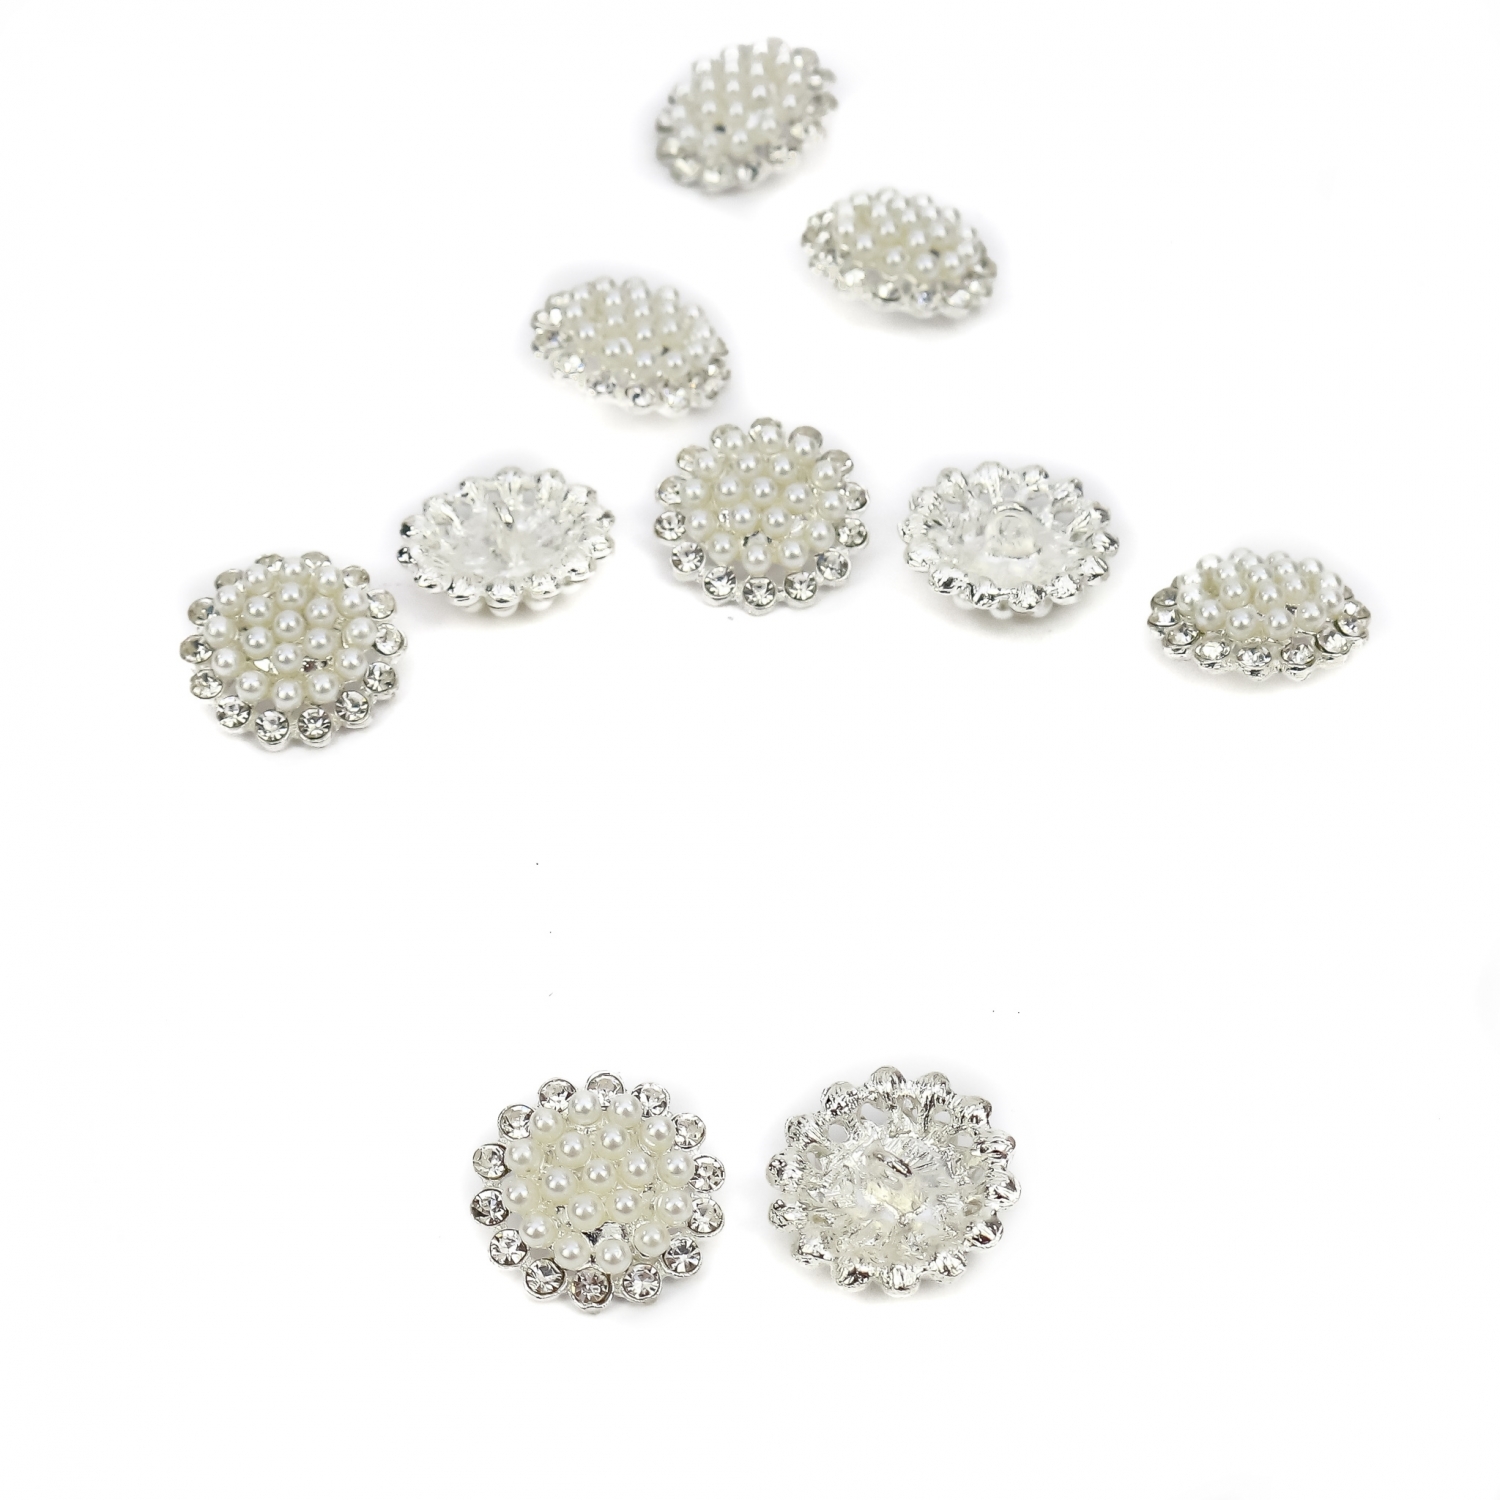 Shank Buttons with Rhinestones, Size 20 mm (10 pcs/pack) Code: BT1151